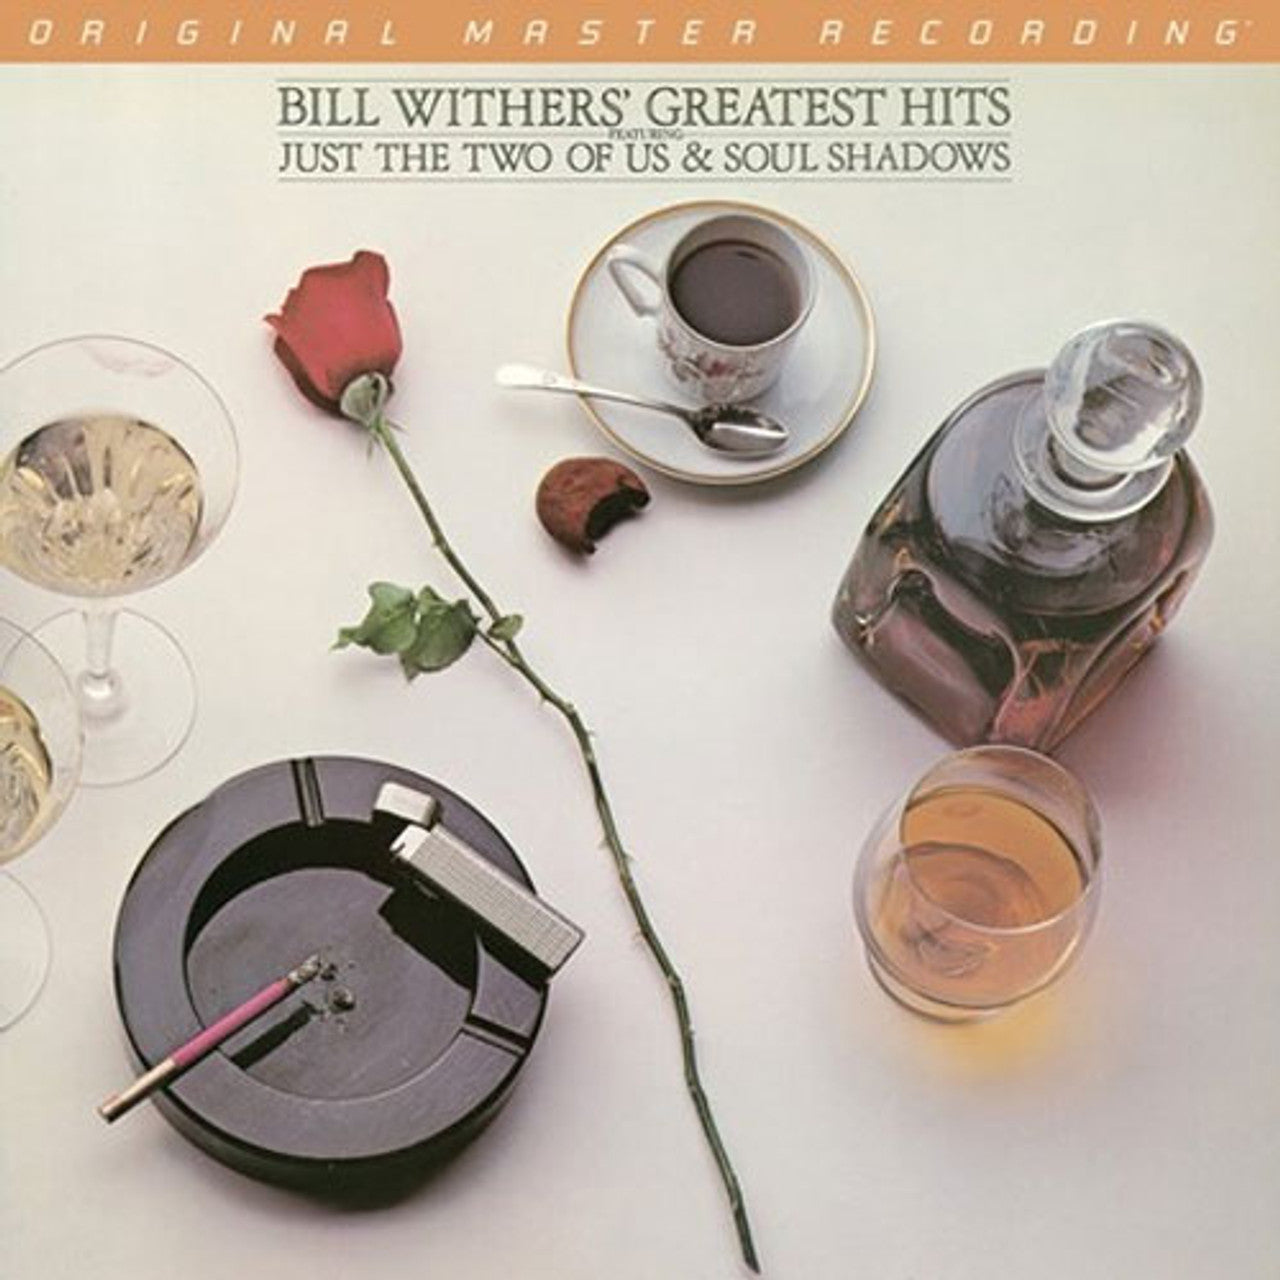 Bill Withers - Bill Withers' Greatest Hits [LP] (180 Gram Audiophile Vinyl, limited/numbered)